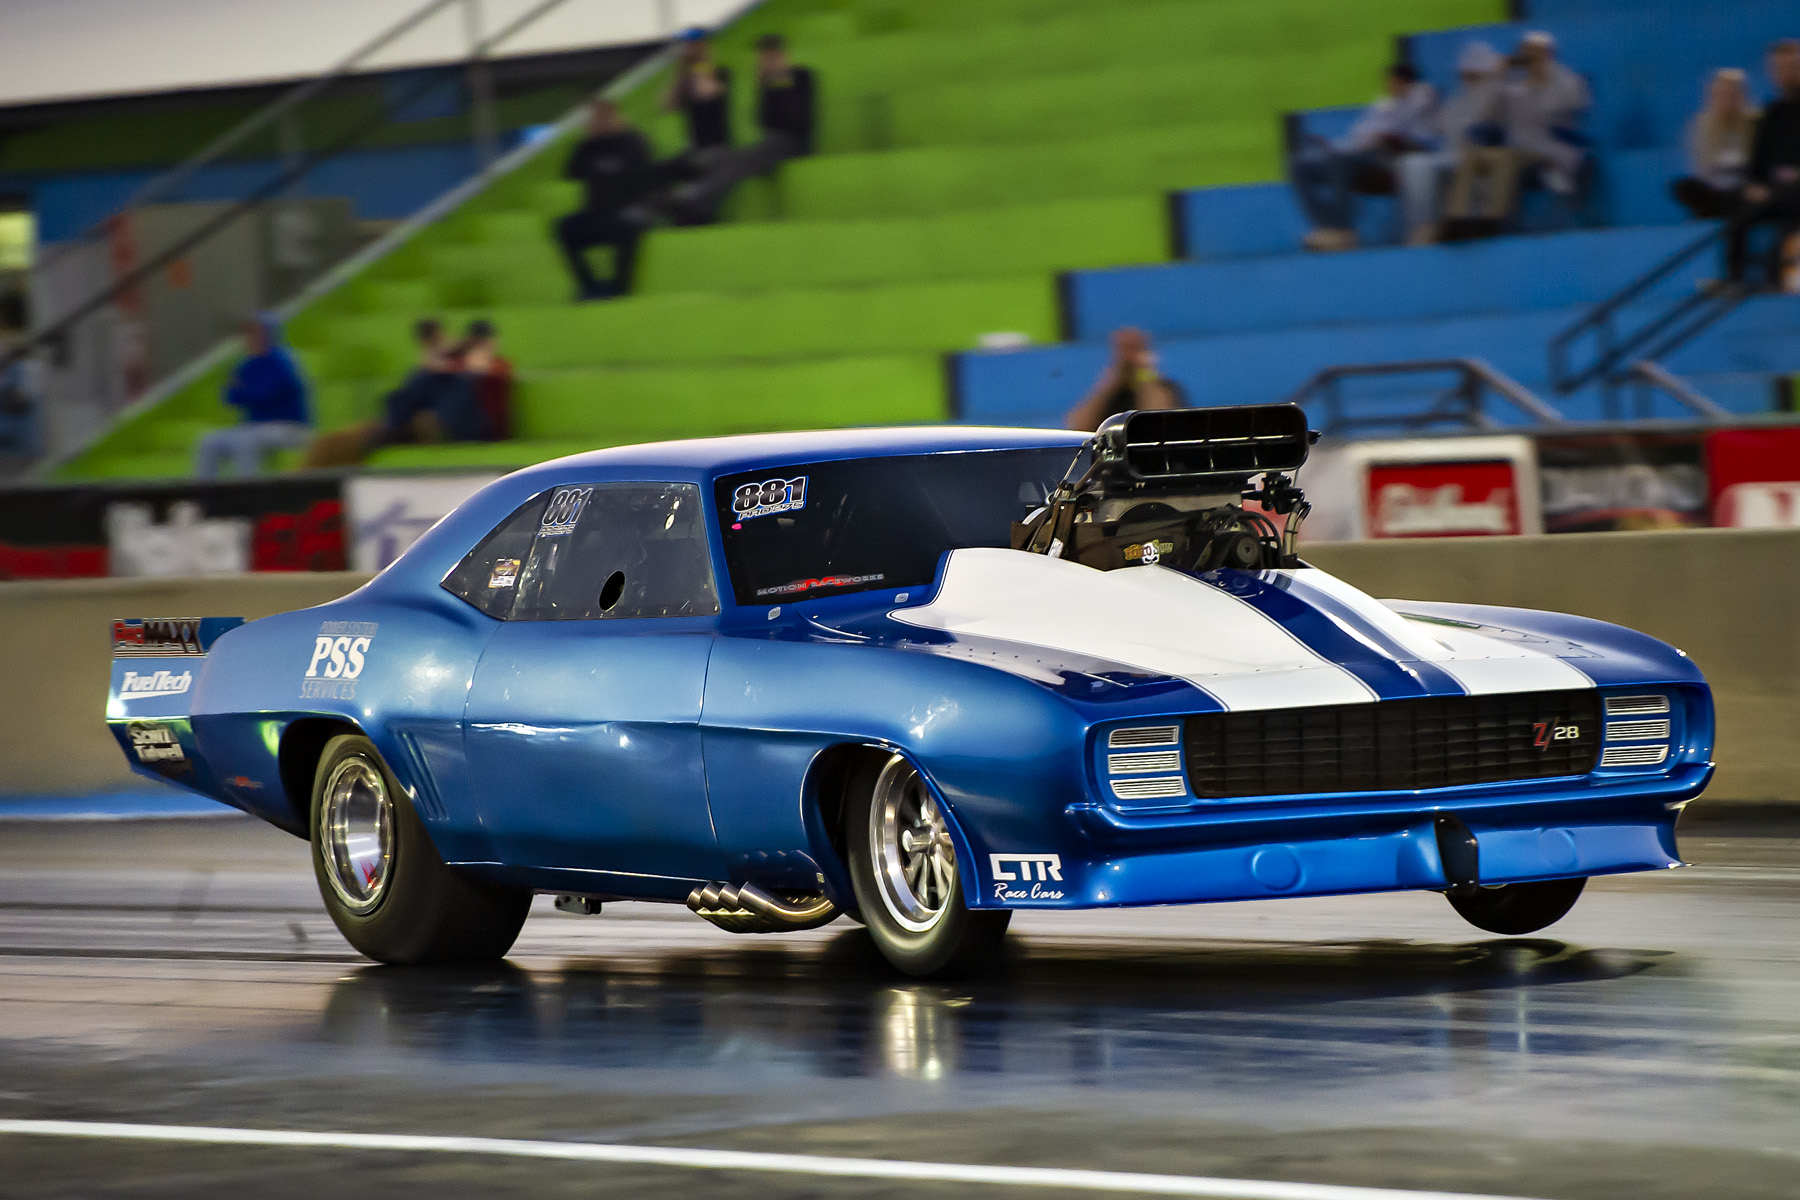 Stevie Fast Jackson Leads the Way at Lights Out 15 Drag Radial Event with Dominant Performance